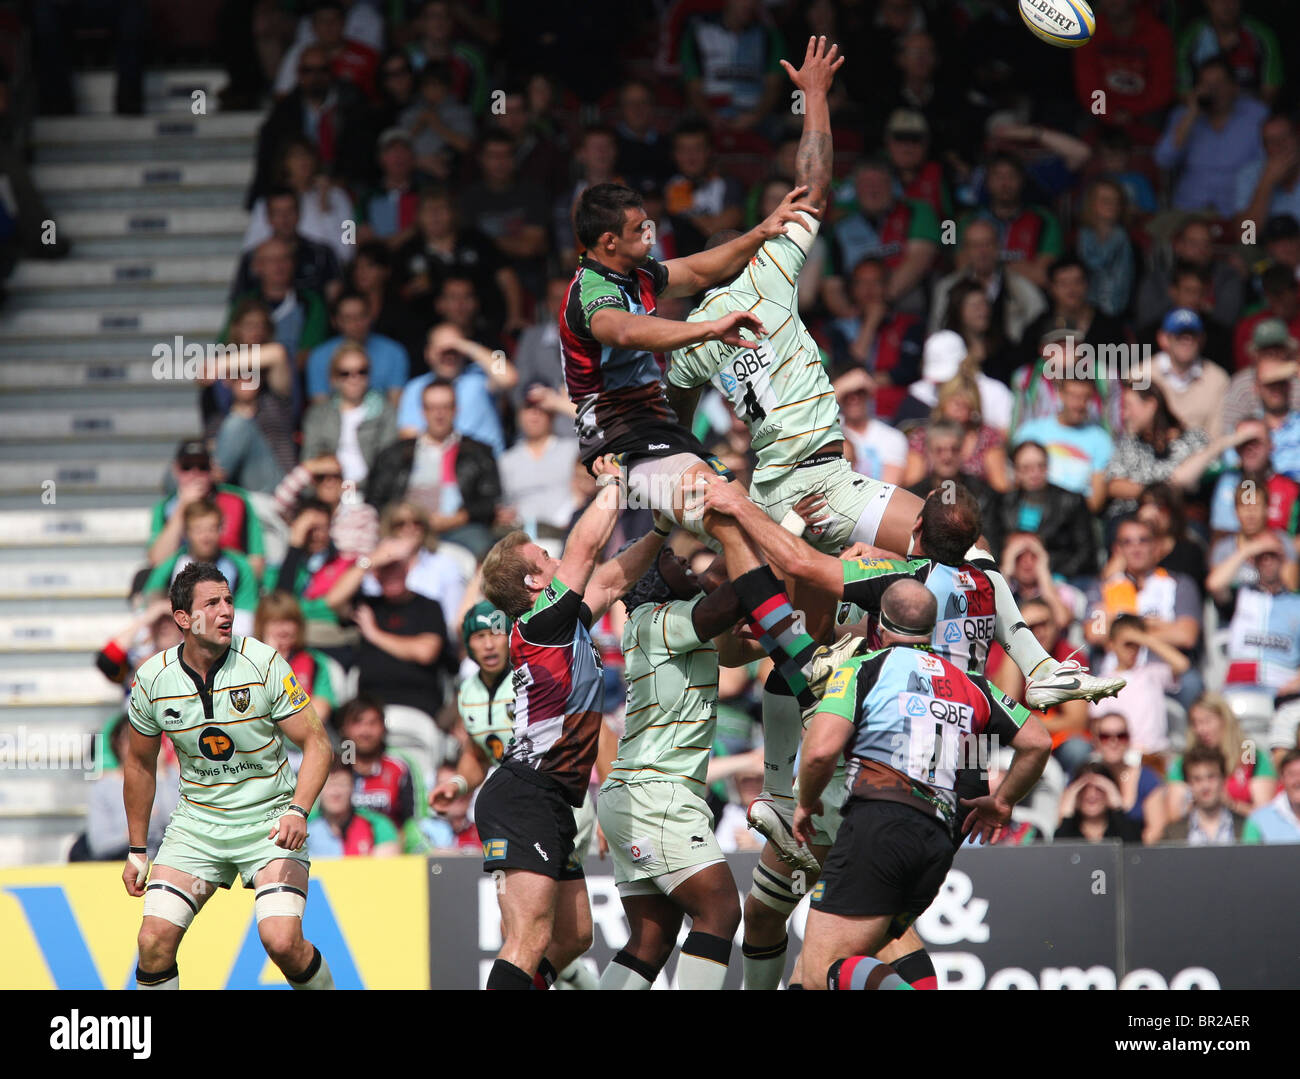 Line out during Aviva Premiership Rugby match Harlequins v Northampton Saints at Twickenham Stoop in London, UK. Stock Photo